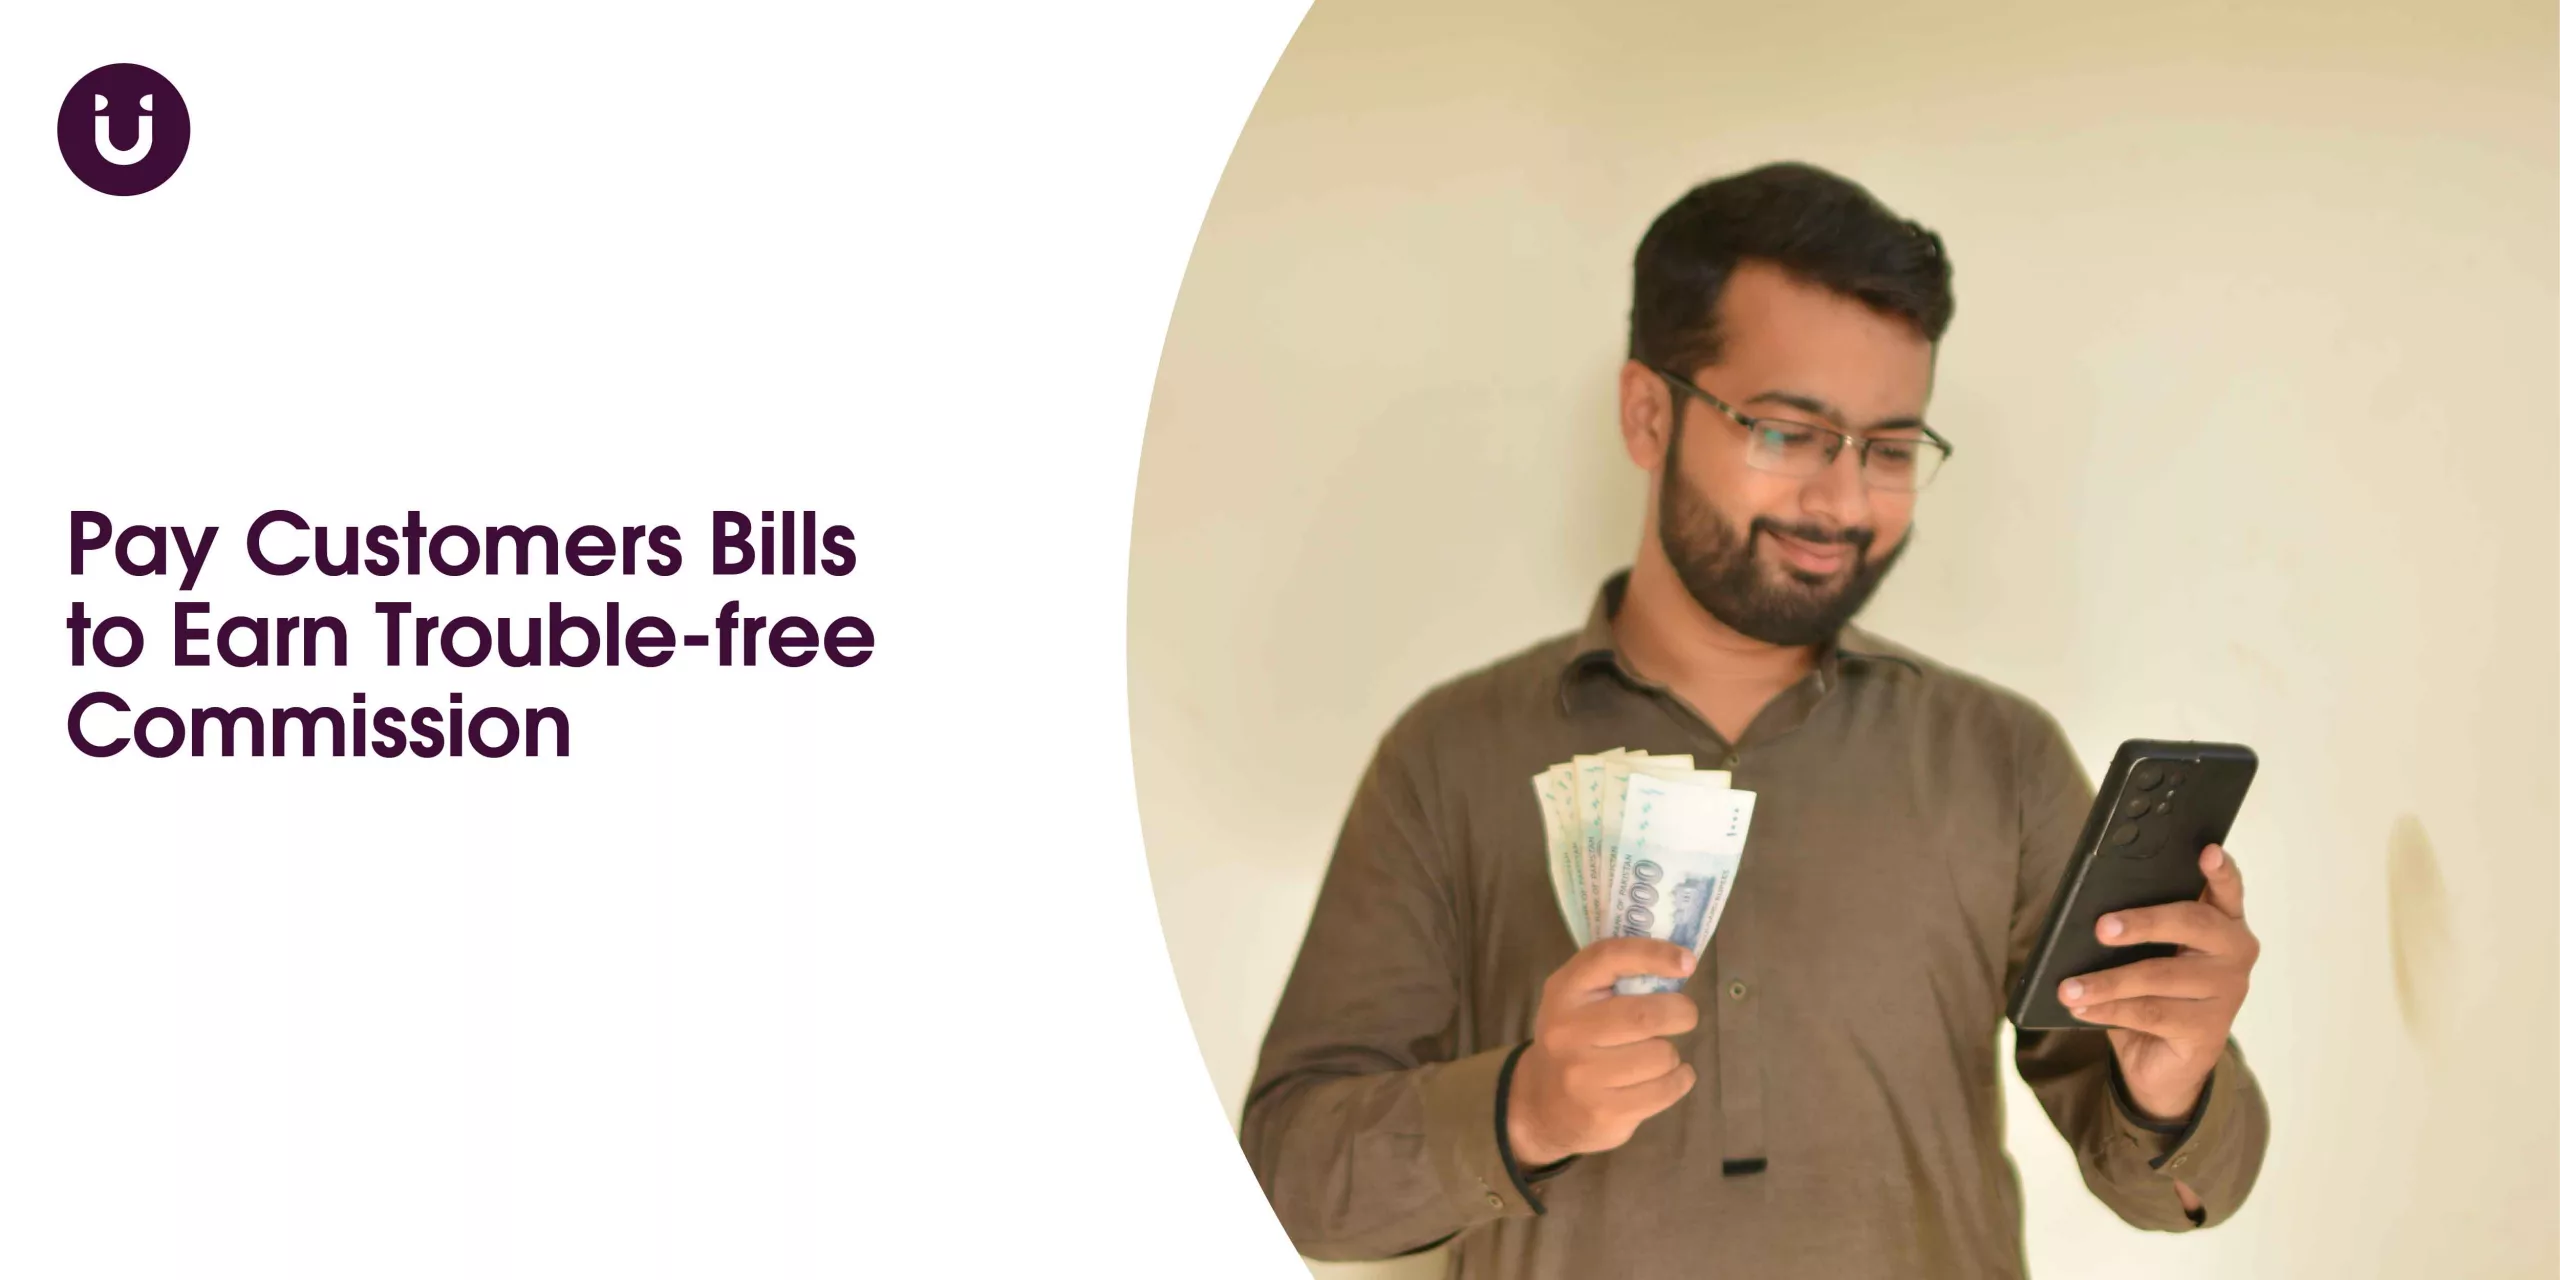 Pay Customers Bills to Earn Trouble-free Commission